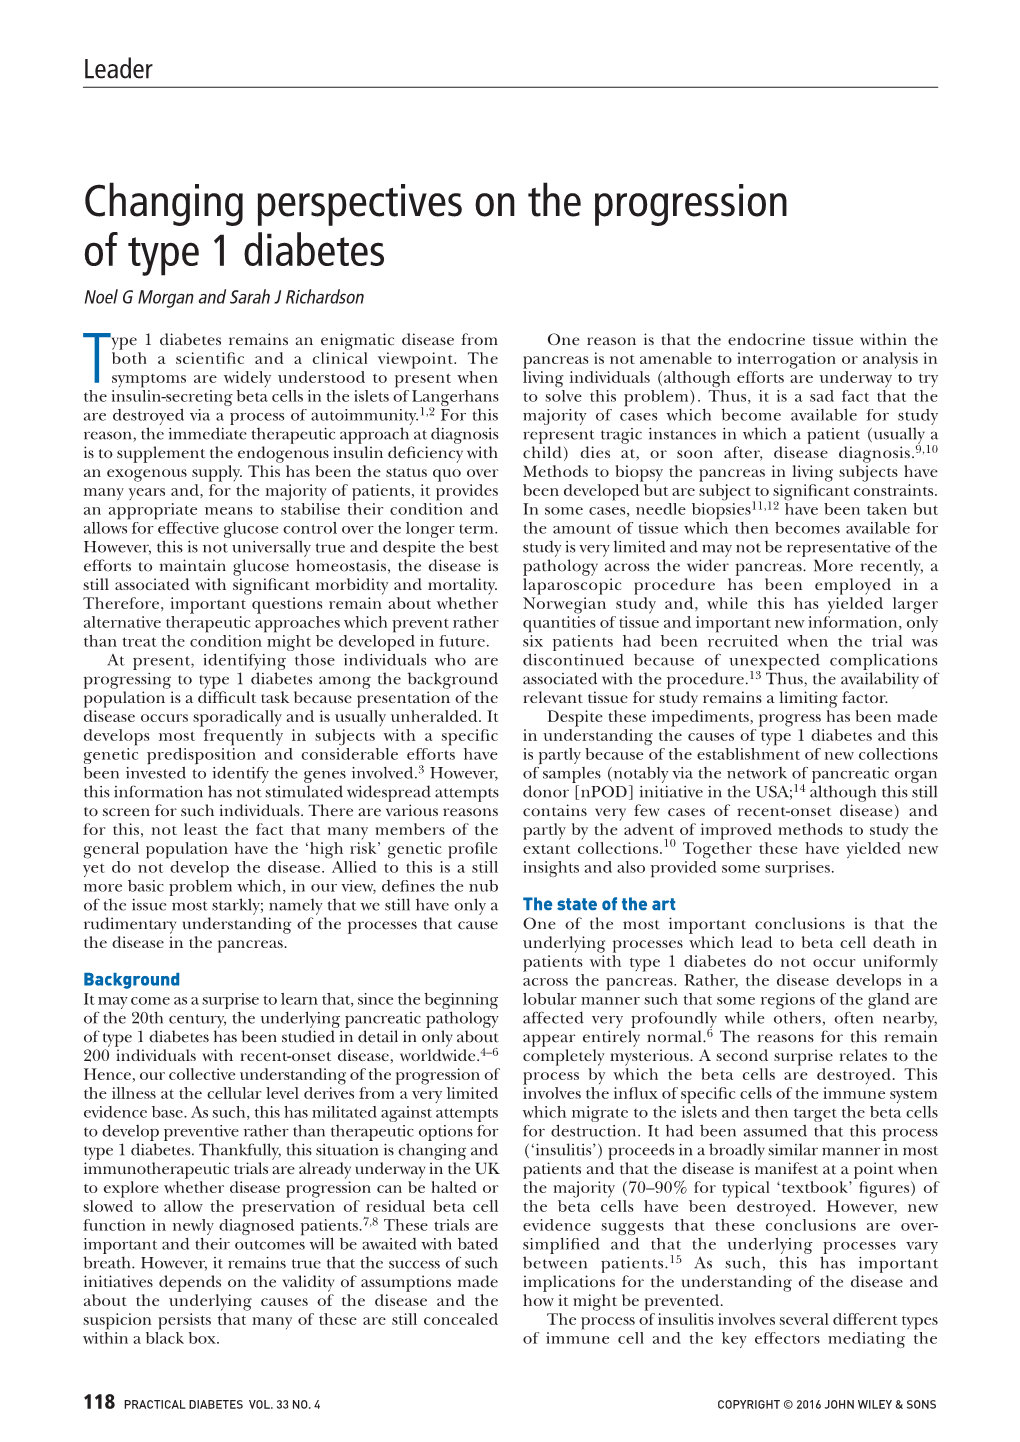 Changing Perspectives on the Progression of Type 1 Diabetes Noel G Morgan and Sarah J Richardson